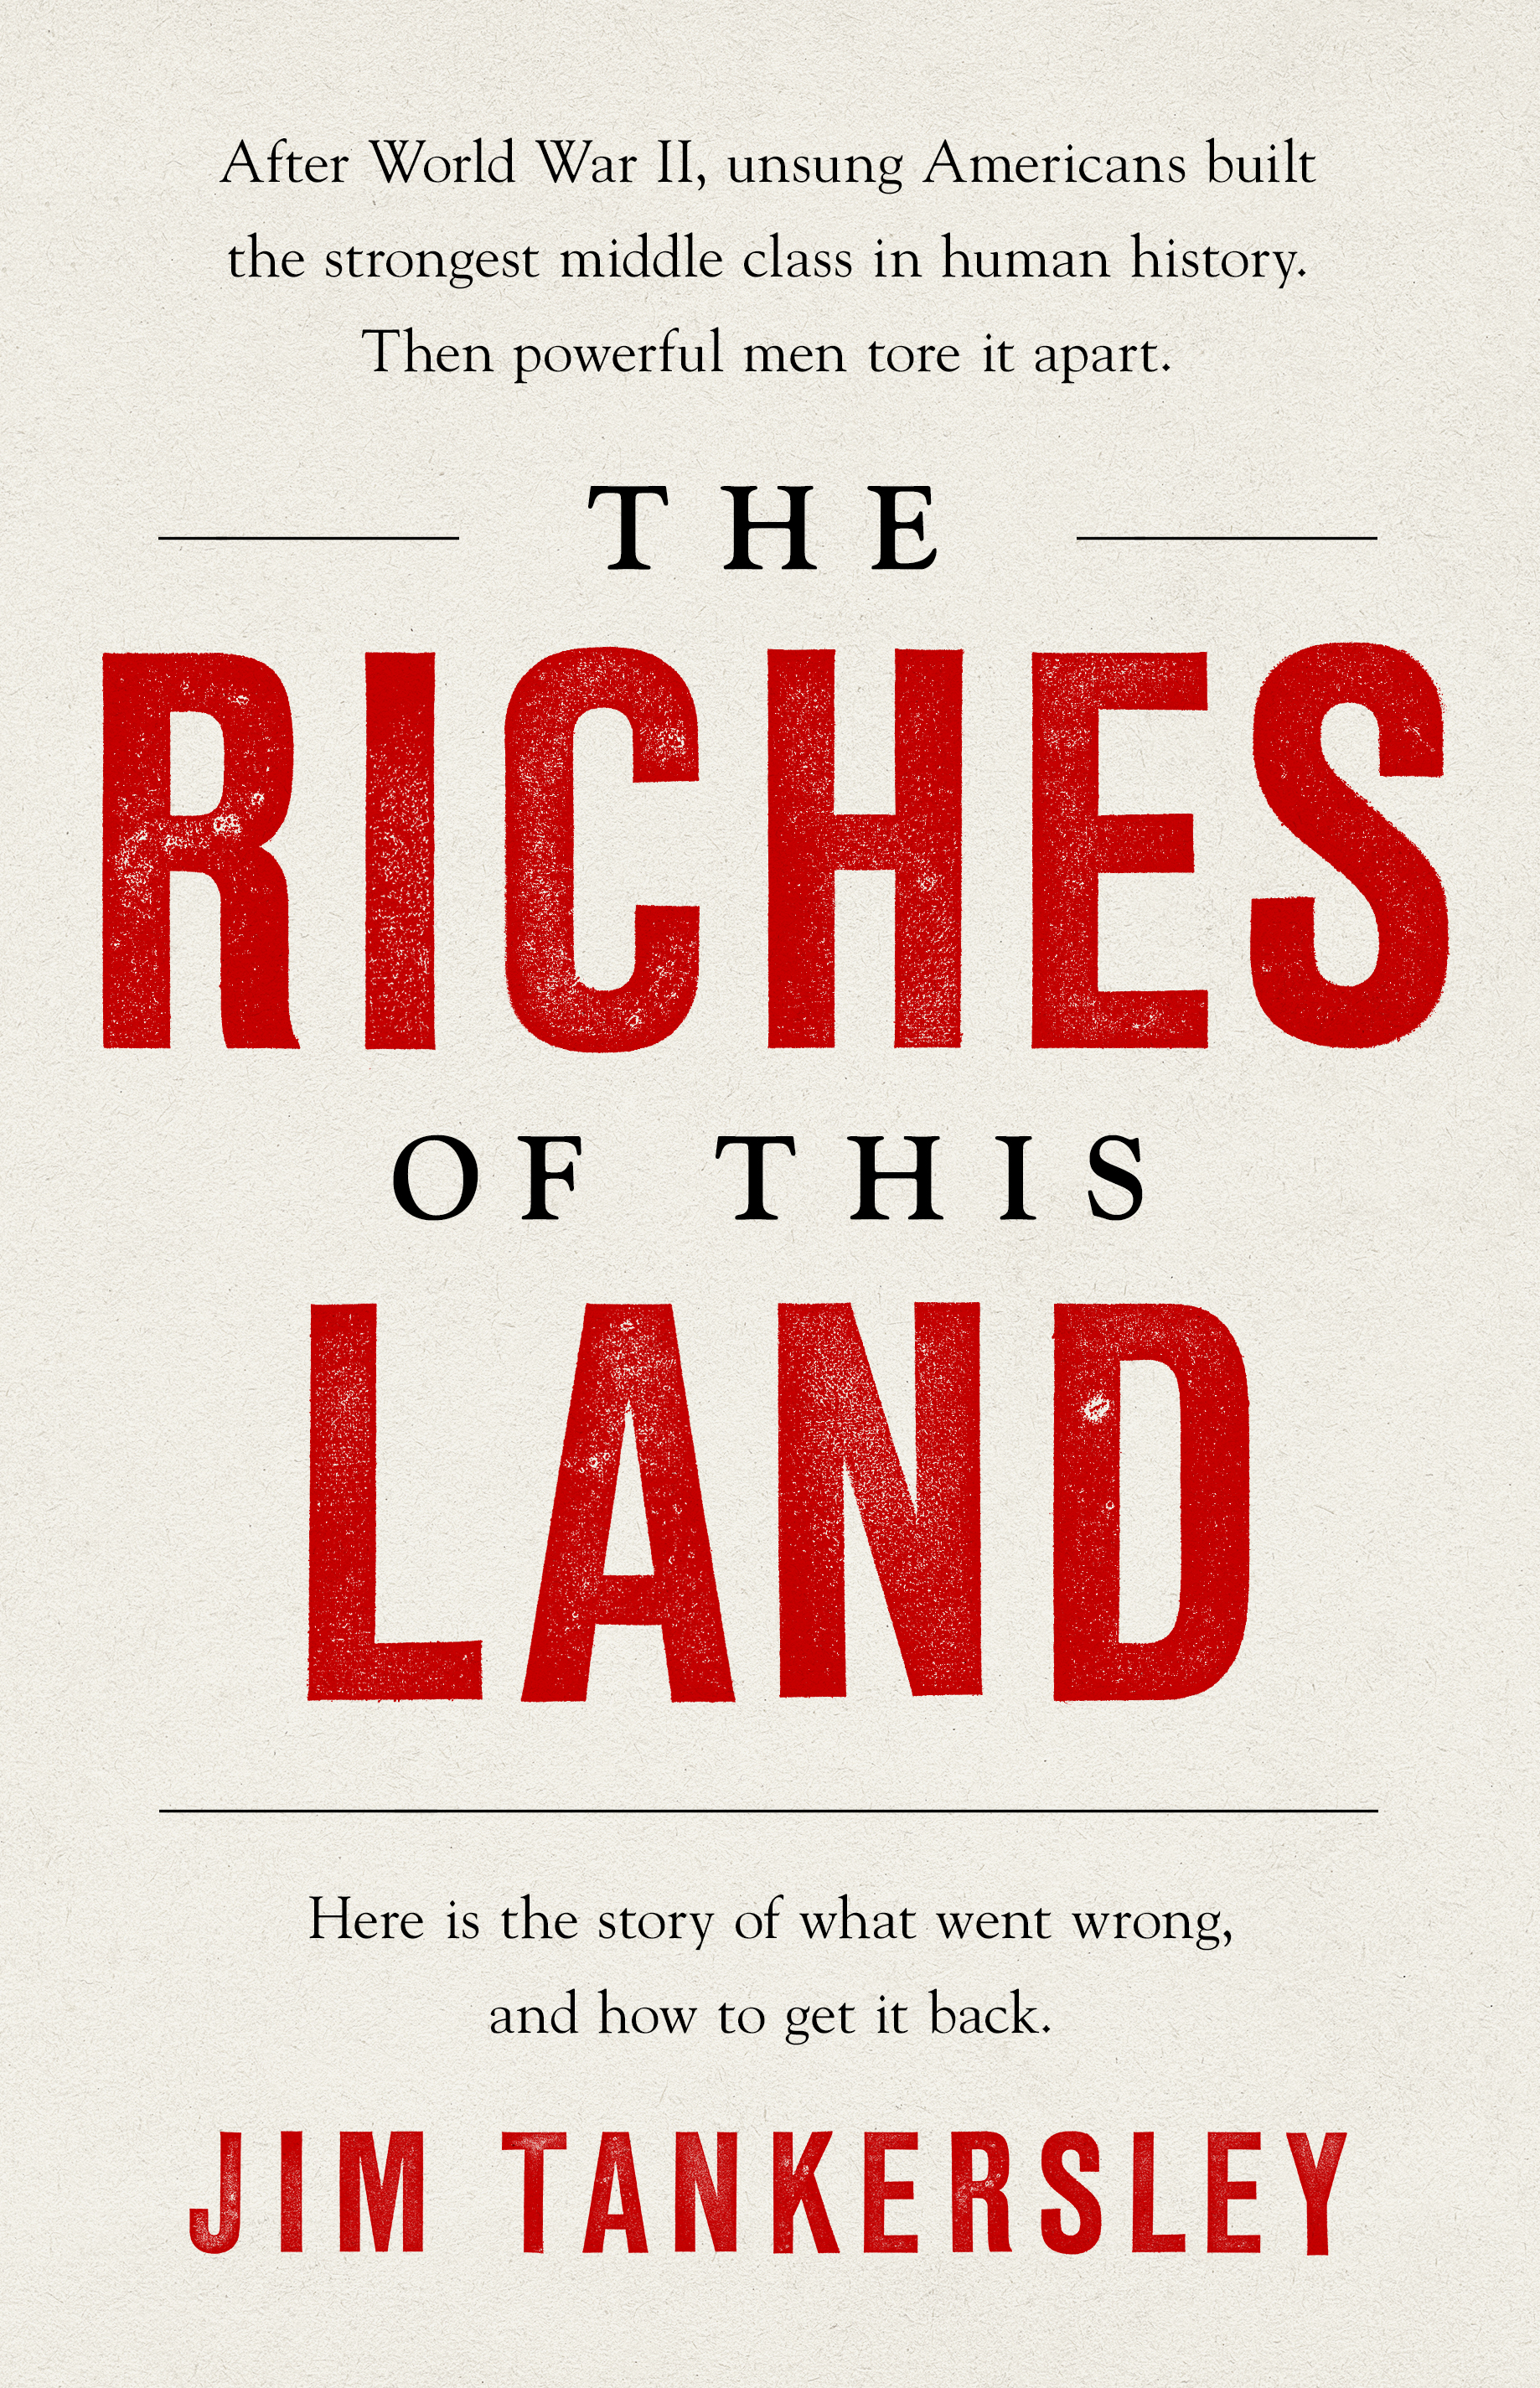 Land　by　This　The　Hachette　Riches　Group　of　Jim　Tankersley　Book